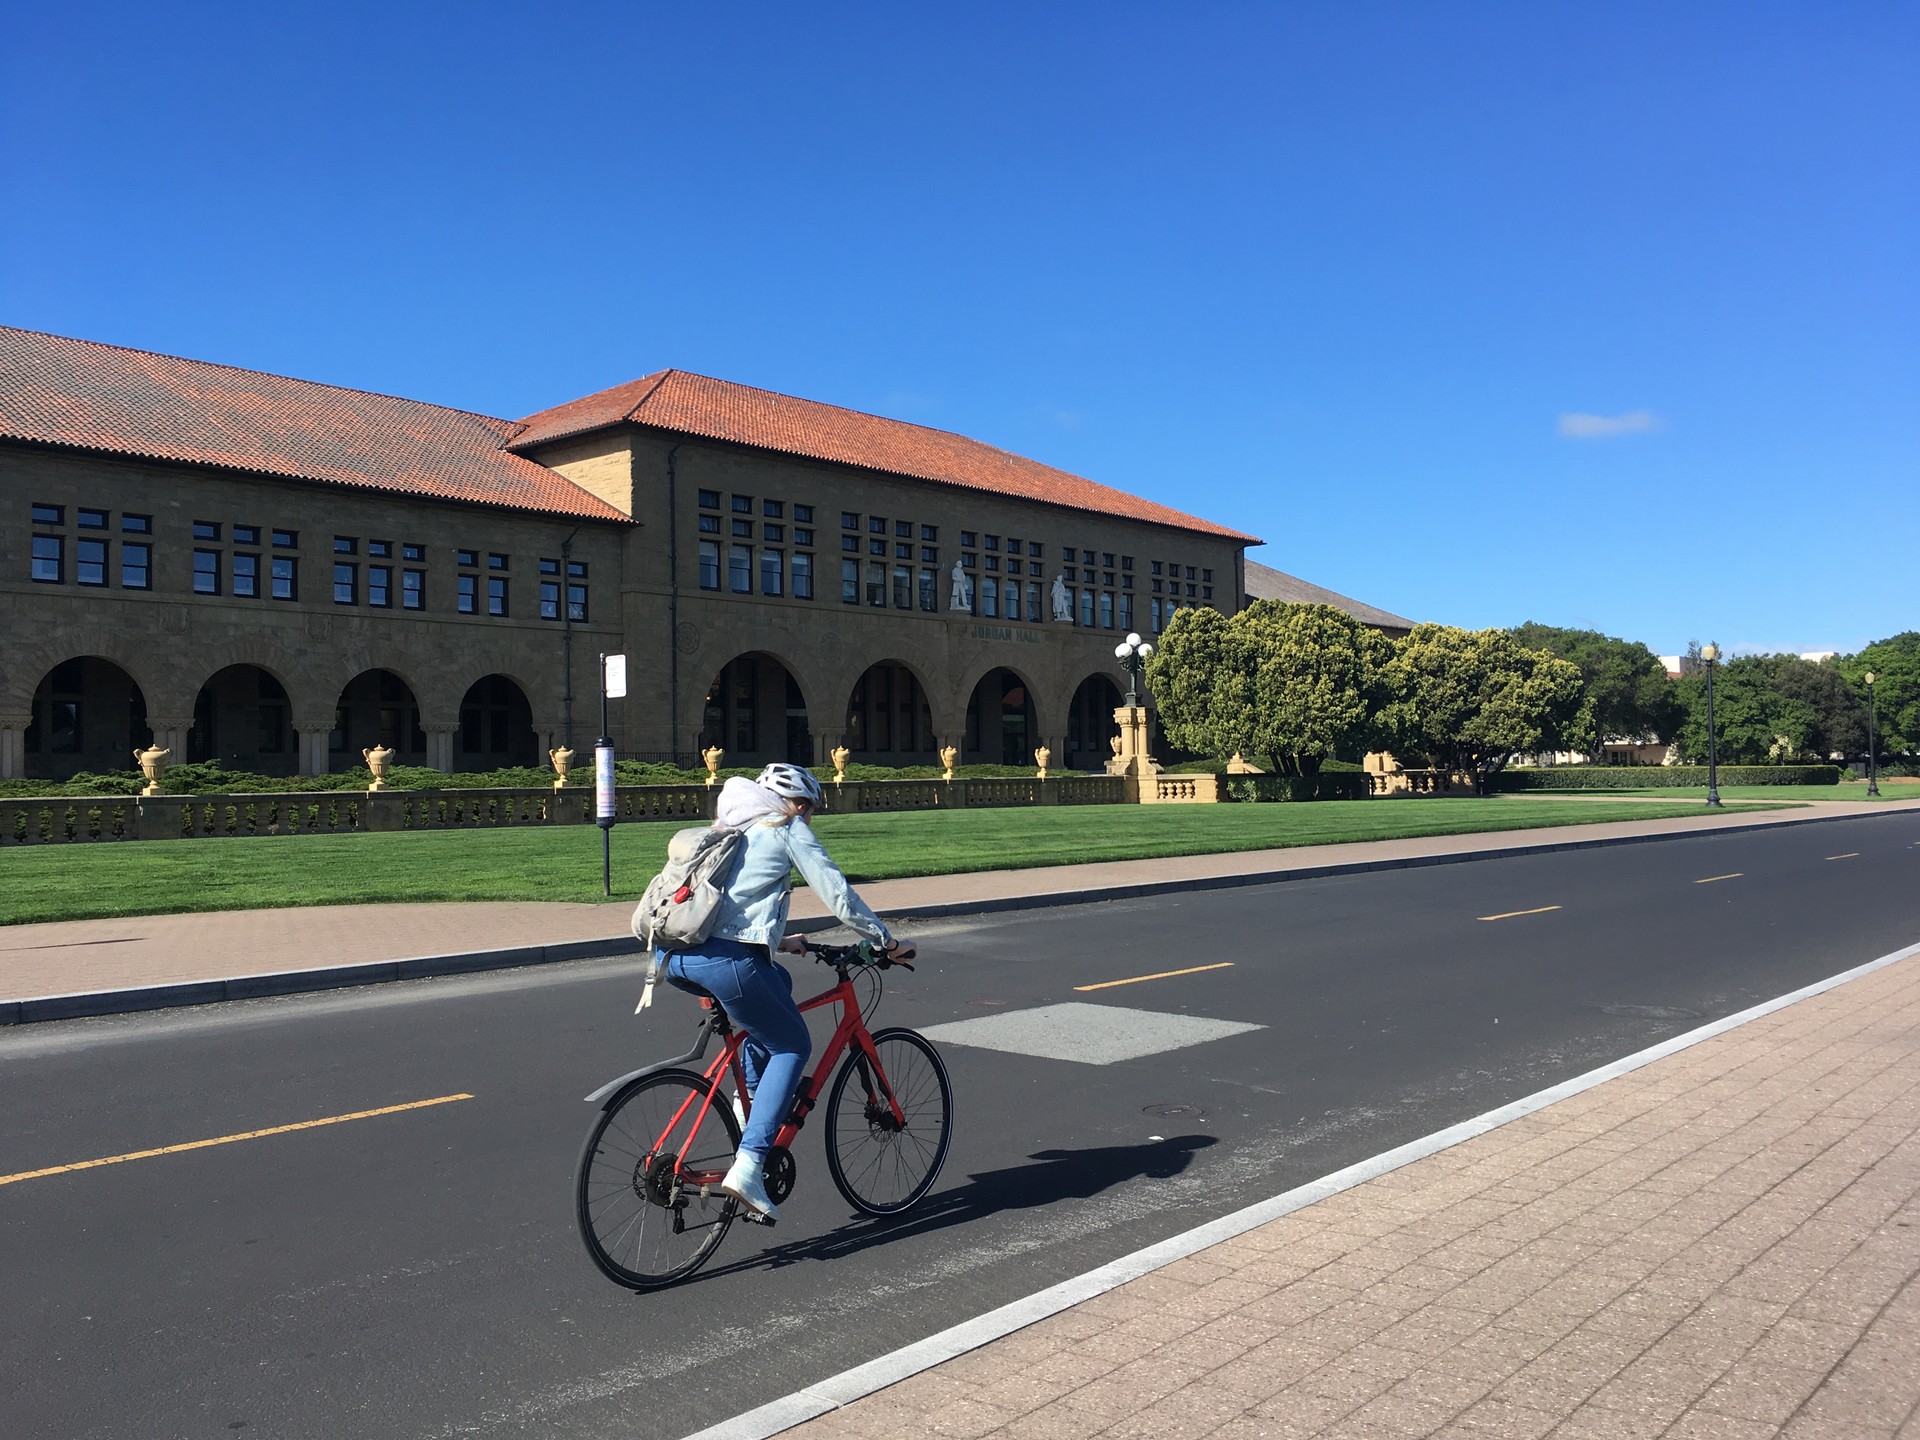 Santa Clara County officials are concerned Stanford's plans for expansion could worsen traffic in the region, among other concerns.